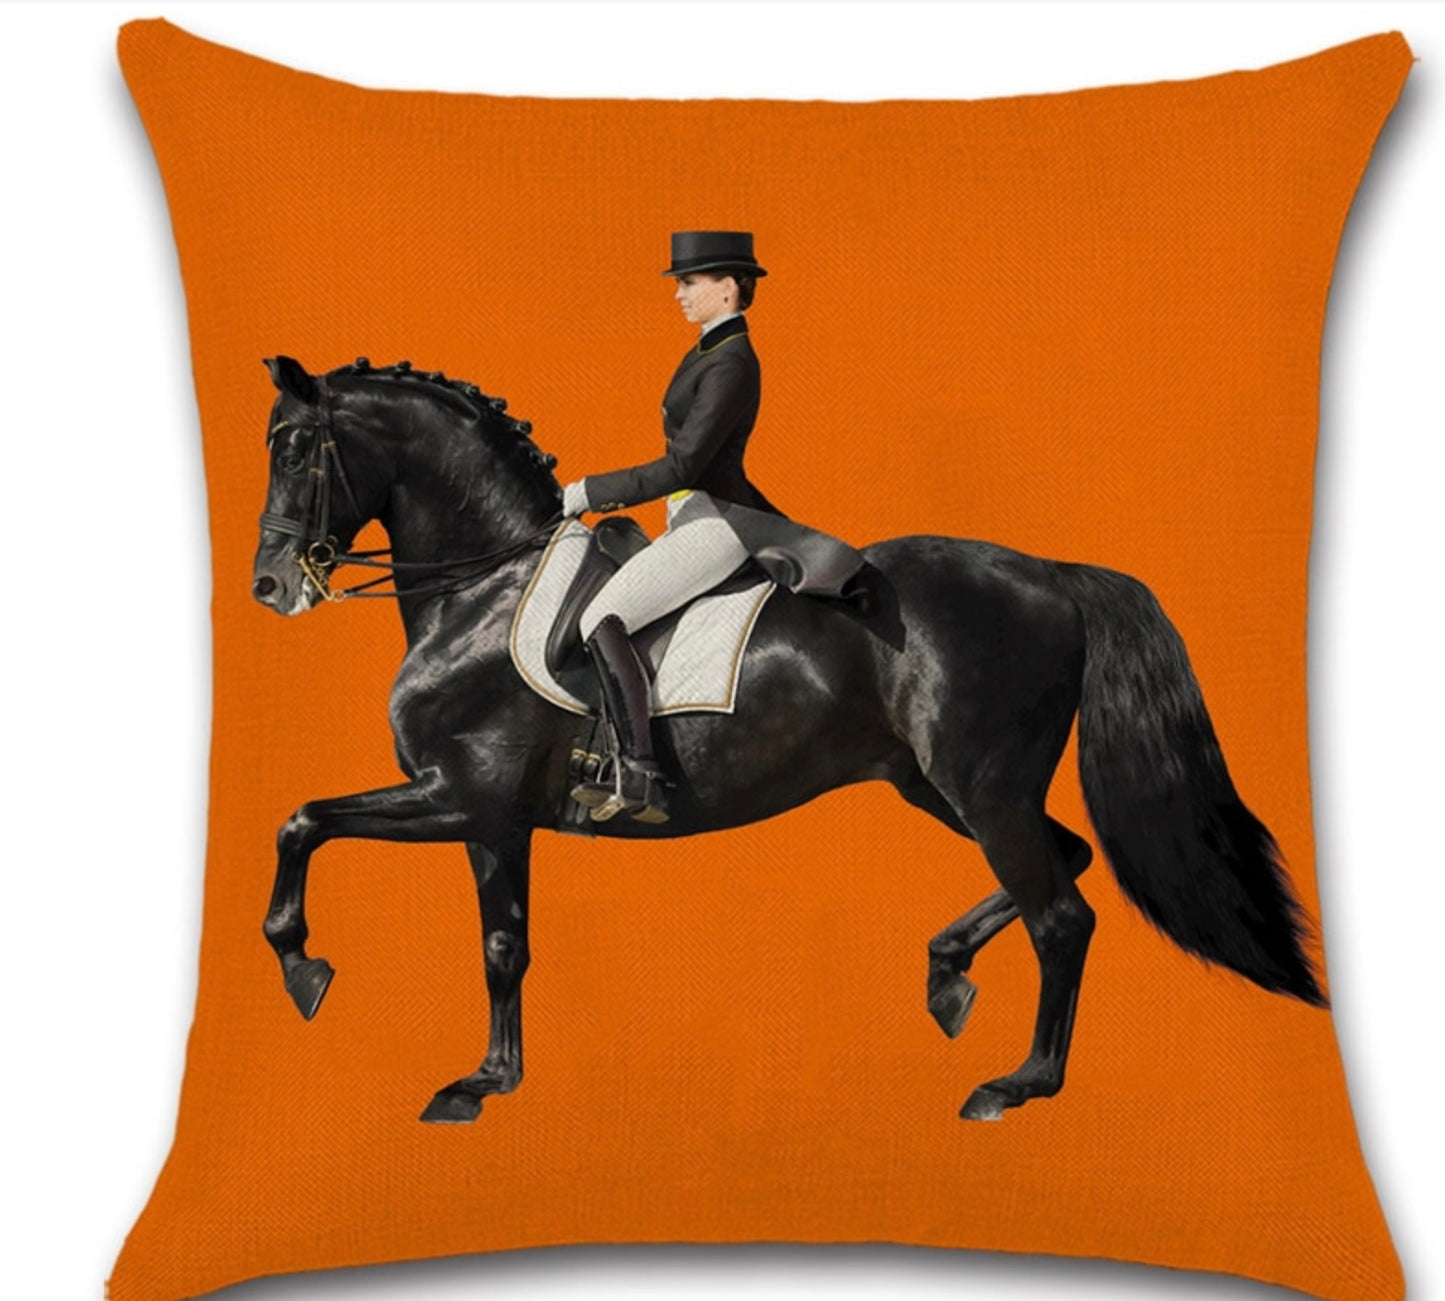 Horse dressage cushion / pillow cover, orange and Black